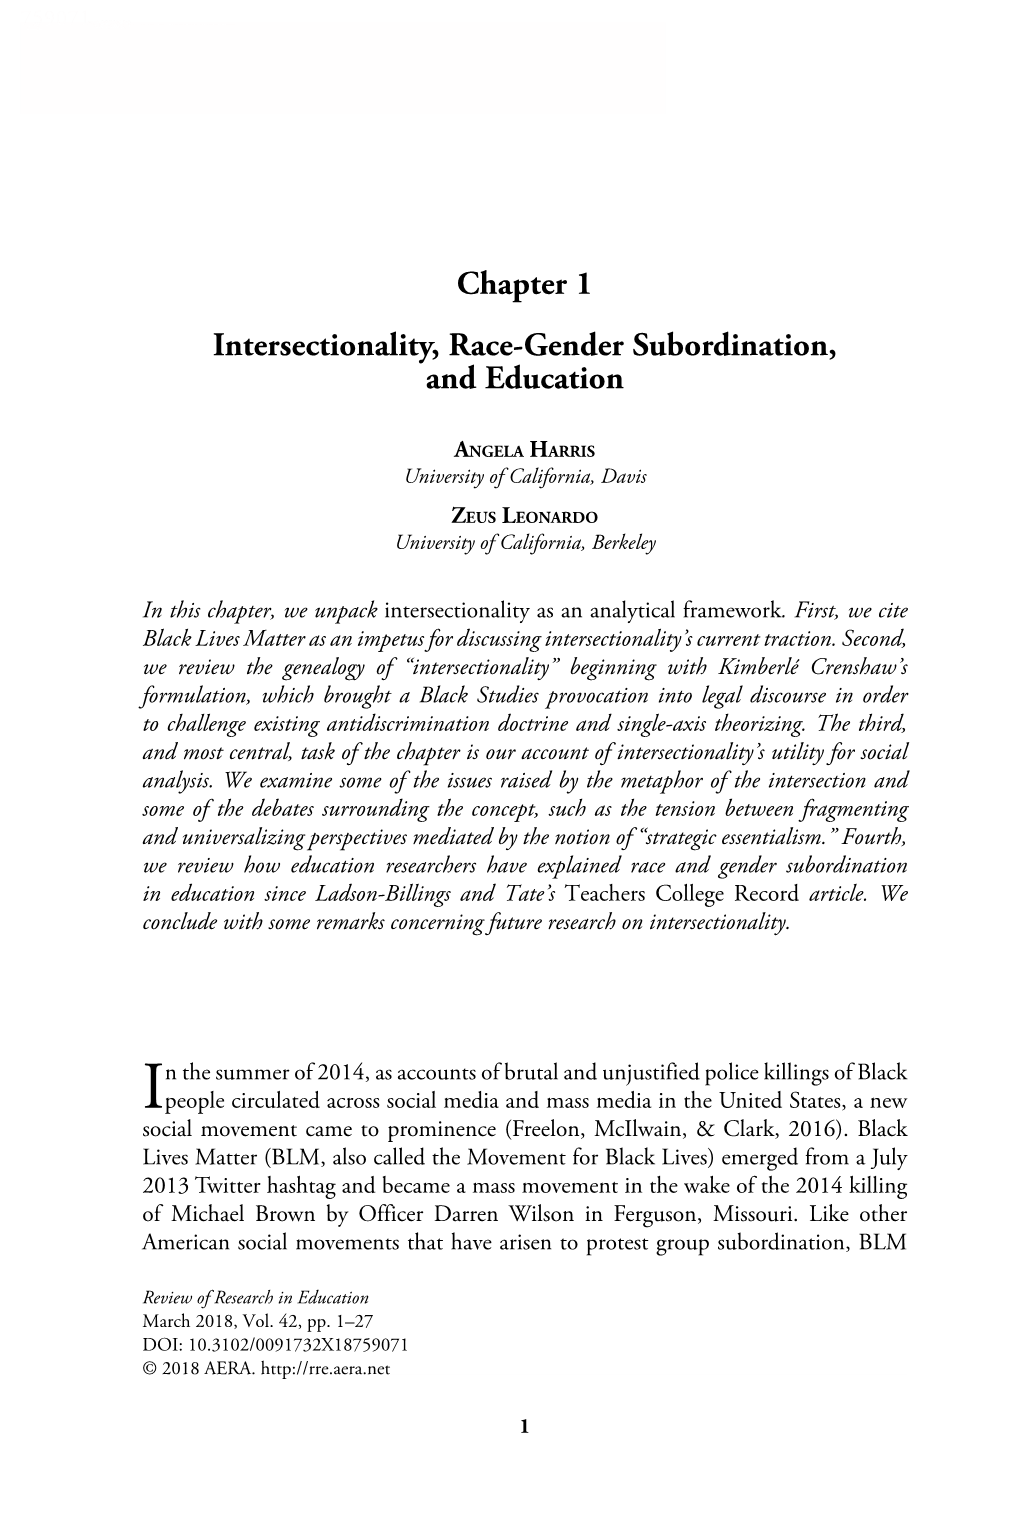 Chapter 1 Intersectionality, Race-Gender Subordination, and Education